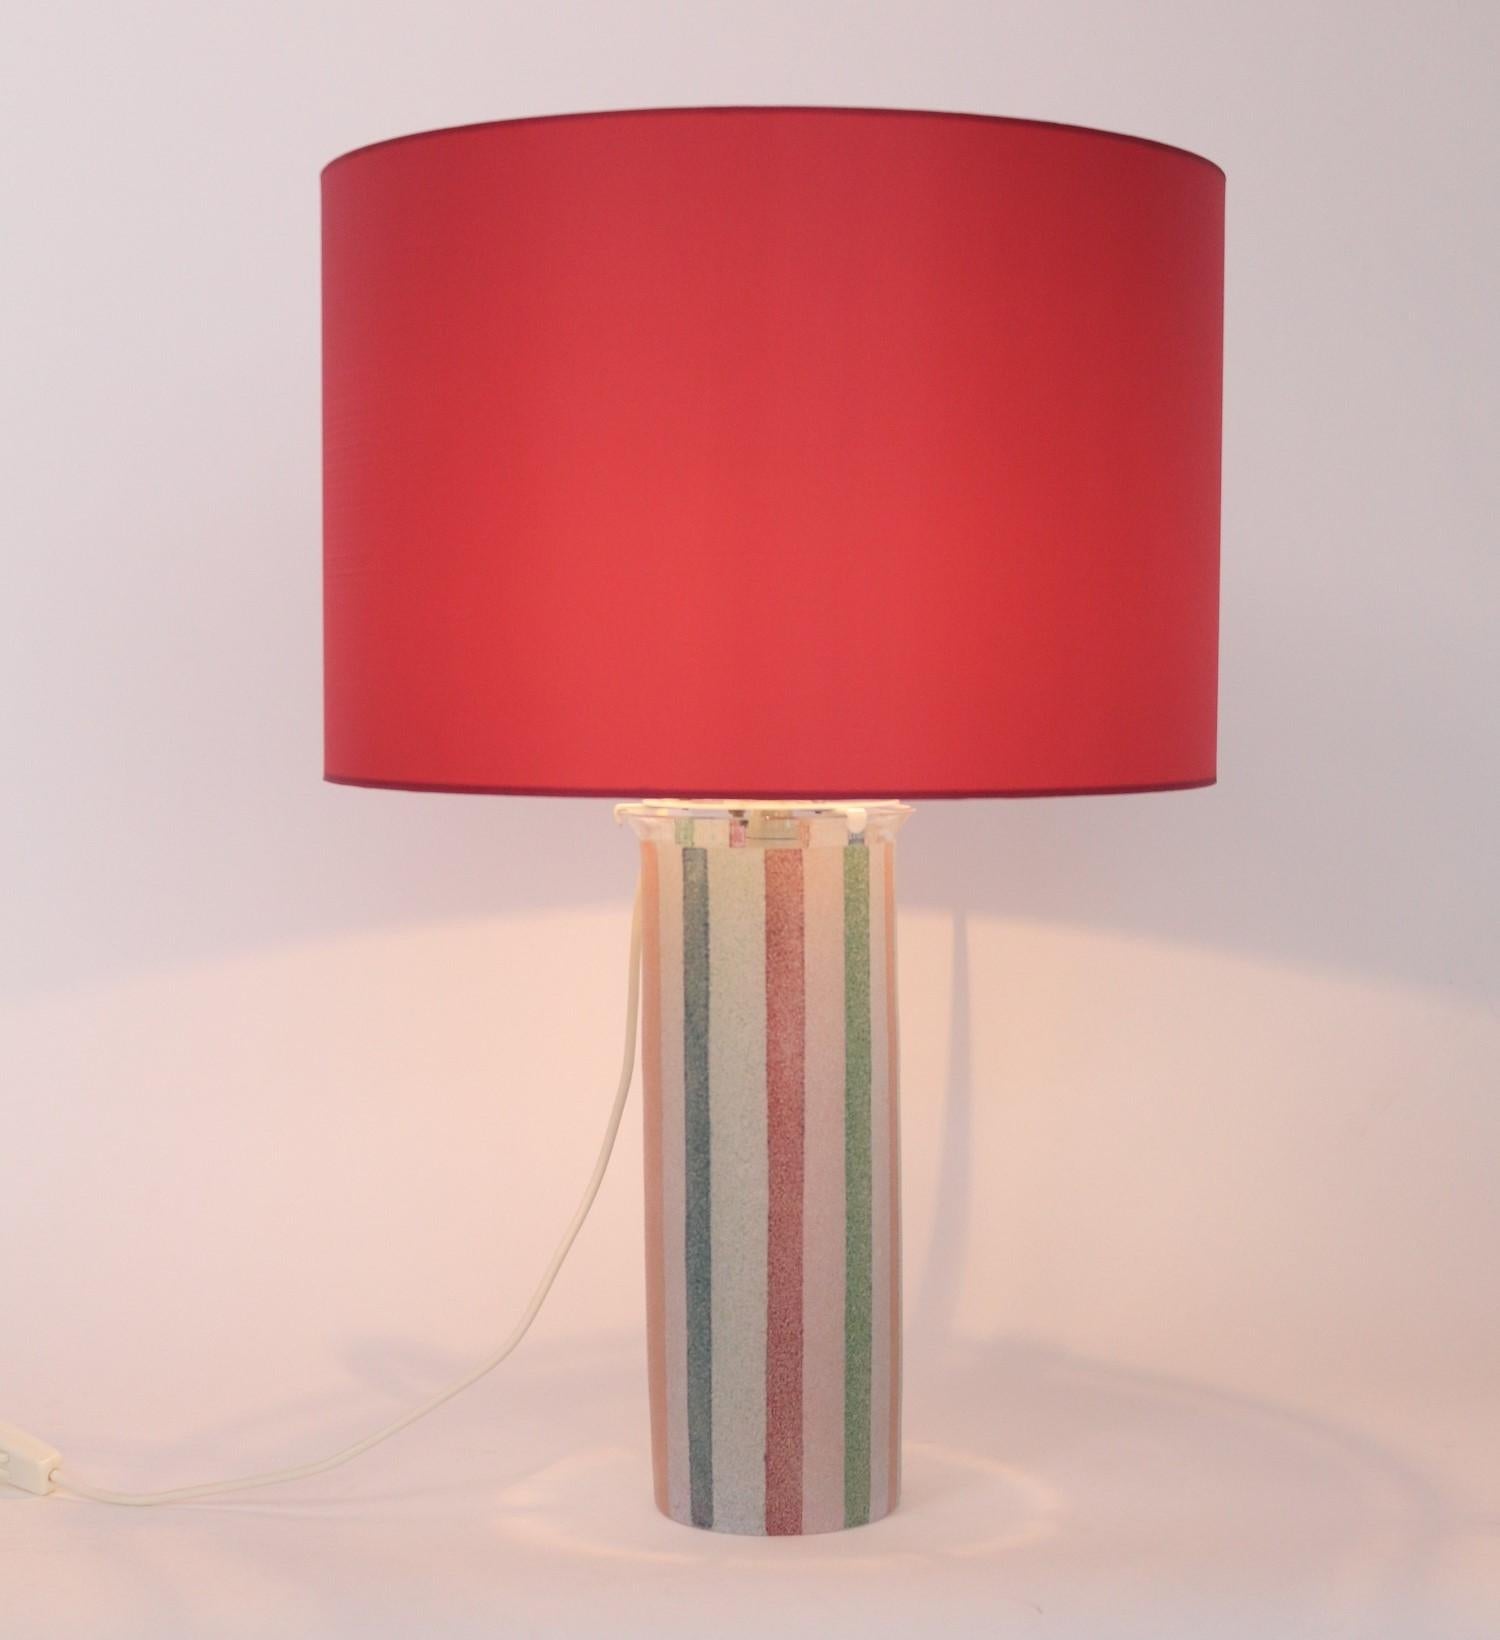 Beautiful colorful table lamp hand crafted of Murano glass during the 1980s by Ghisetti Creazioni, Venice, Italy. With original manufacturers label.
The glass lamp works with one Edison bulb max 100W, and is in very good condition, no defects on the